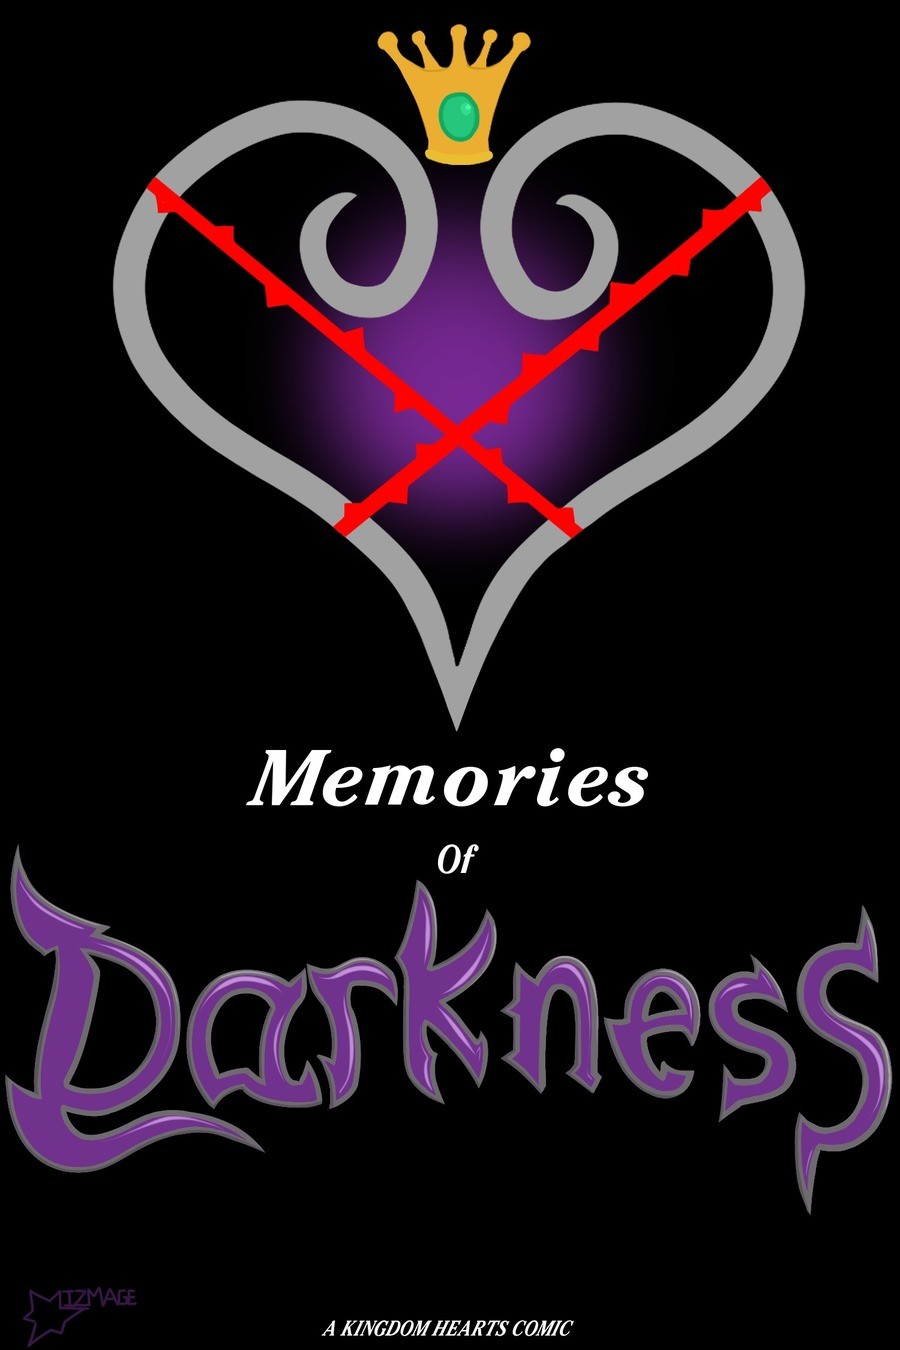 Memories of Darkness part 1 Repost. Reposting these cuz im actually working on part 3 now also i am super bored right now. part 2 in 10 minutes or 20 depending 